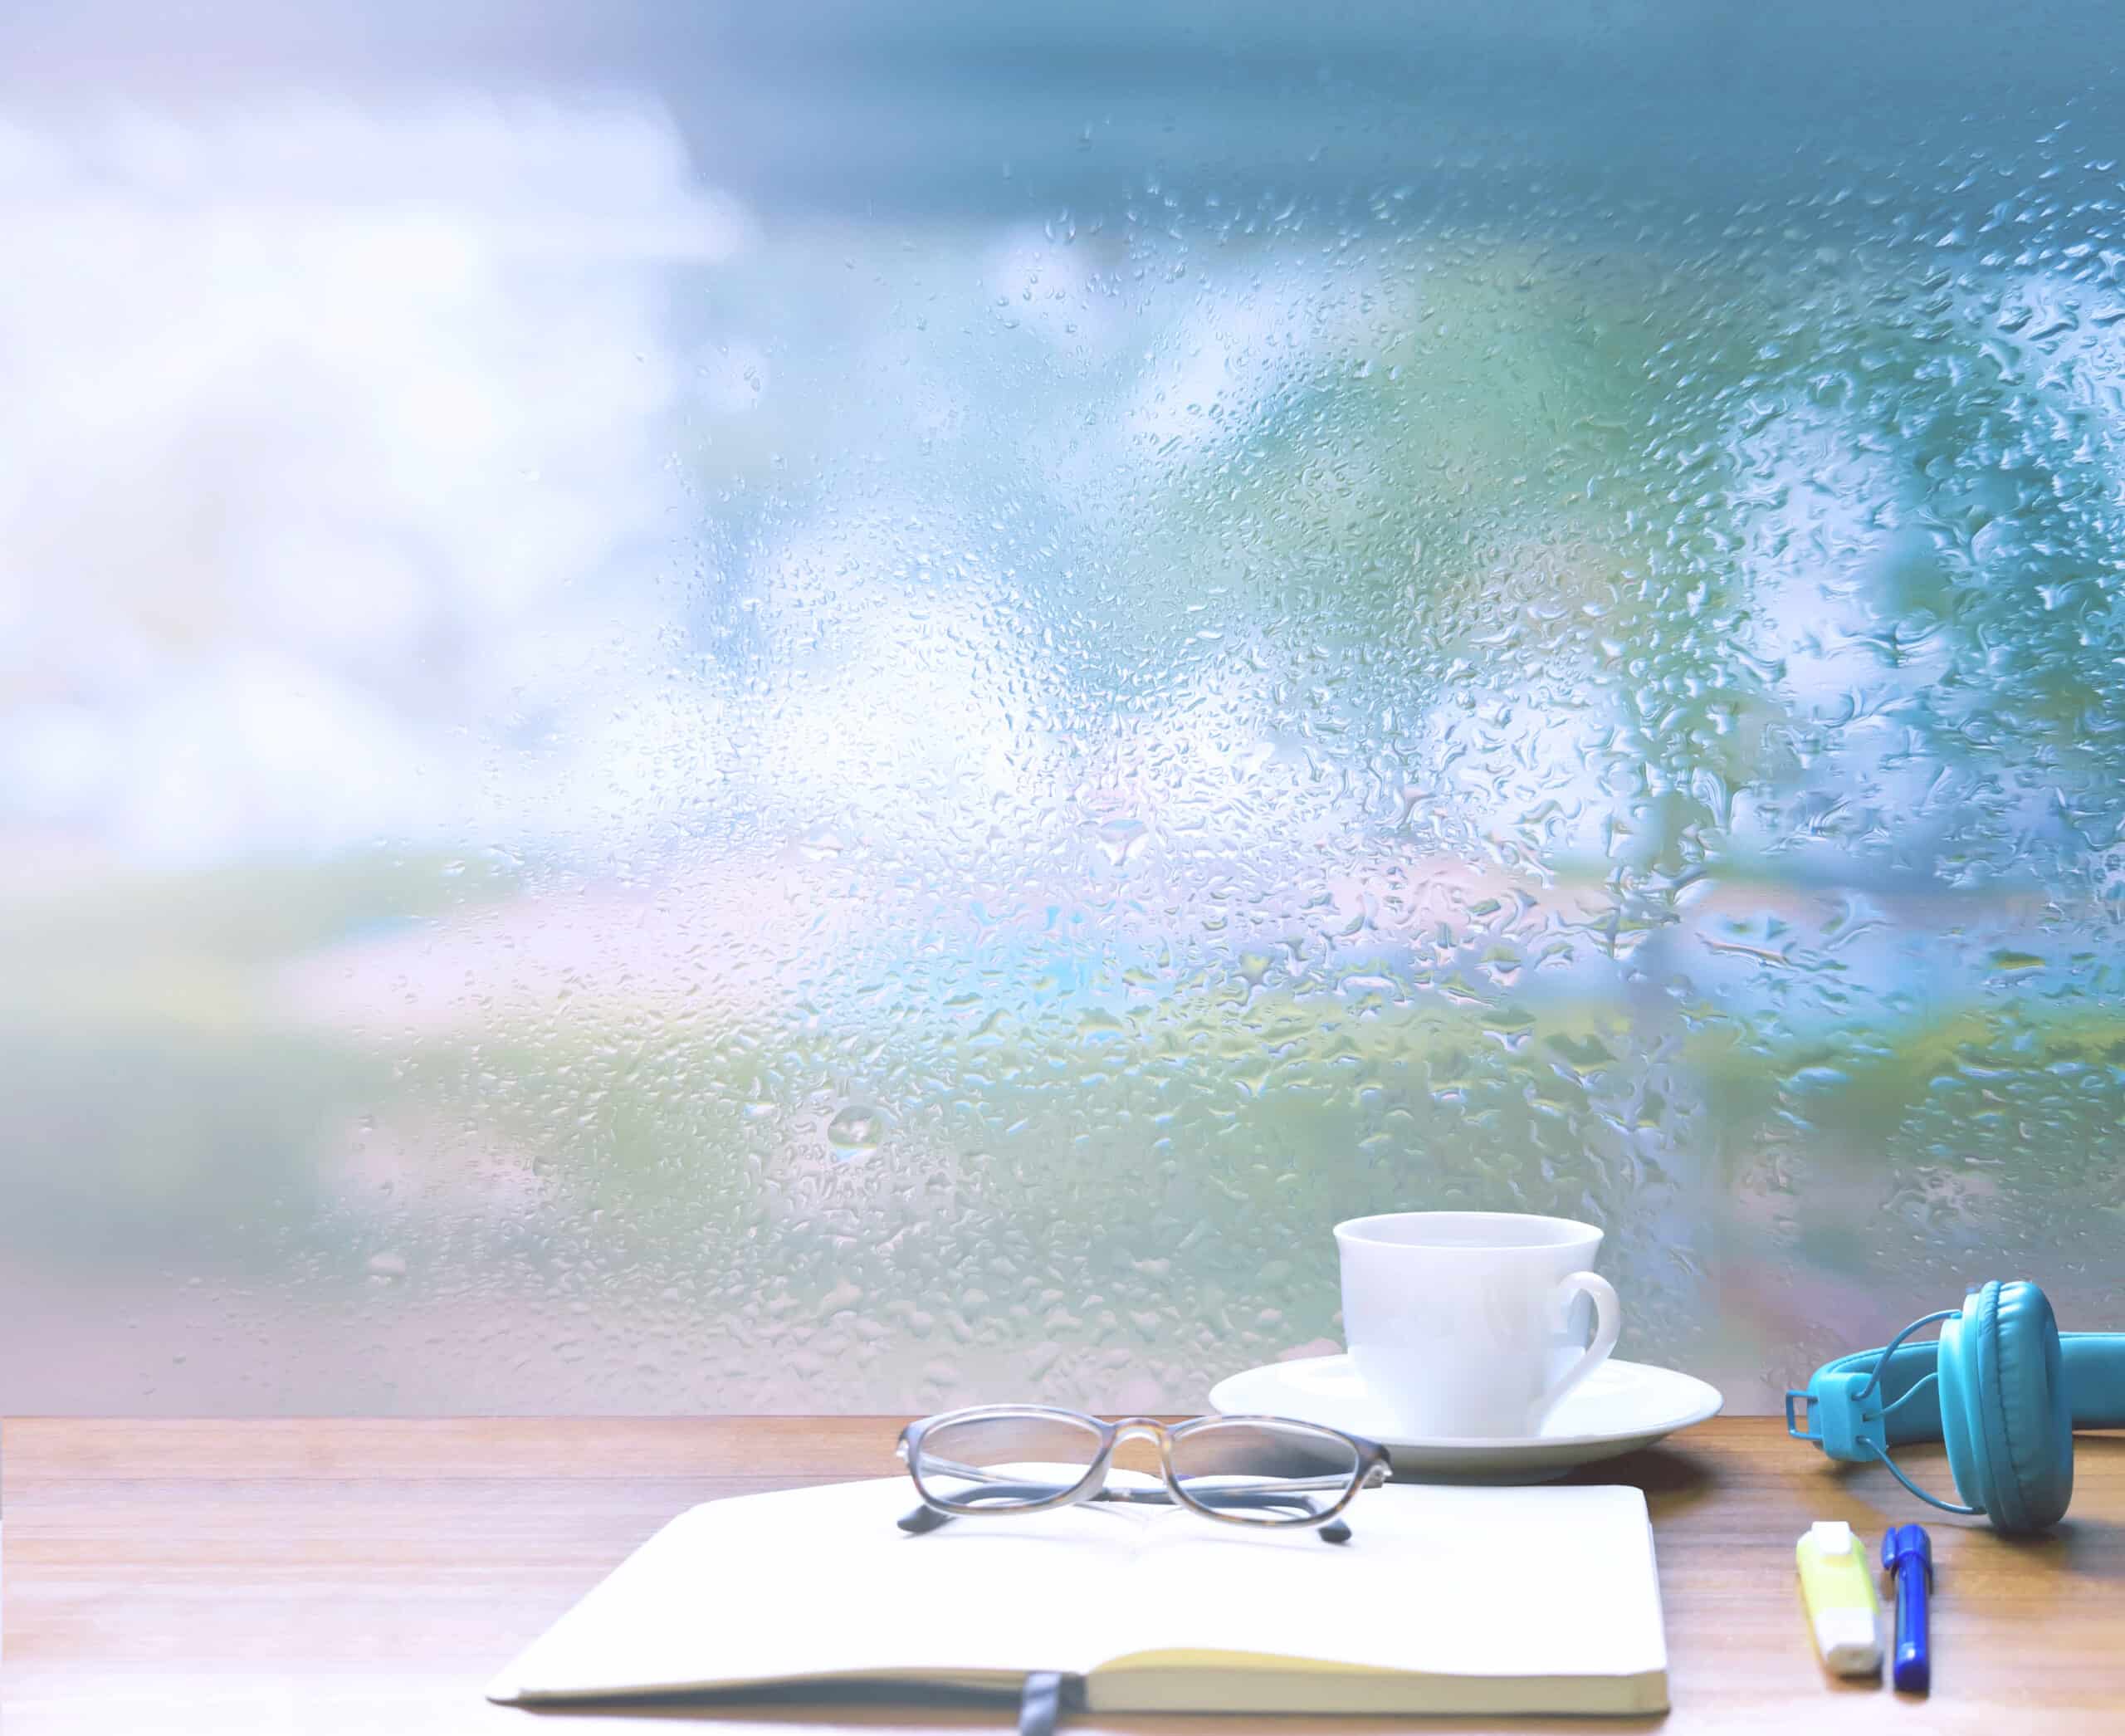 water drops forming on the glass window, open blank notebook, glasses, and a cup on windowsill